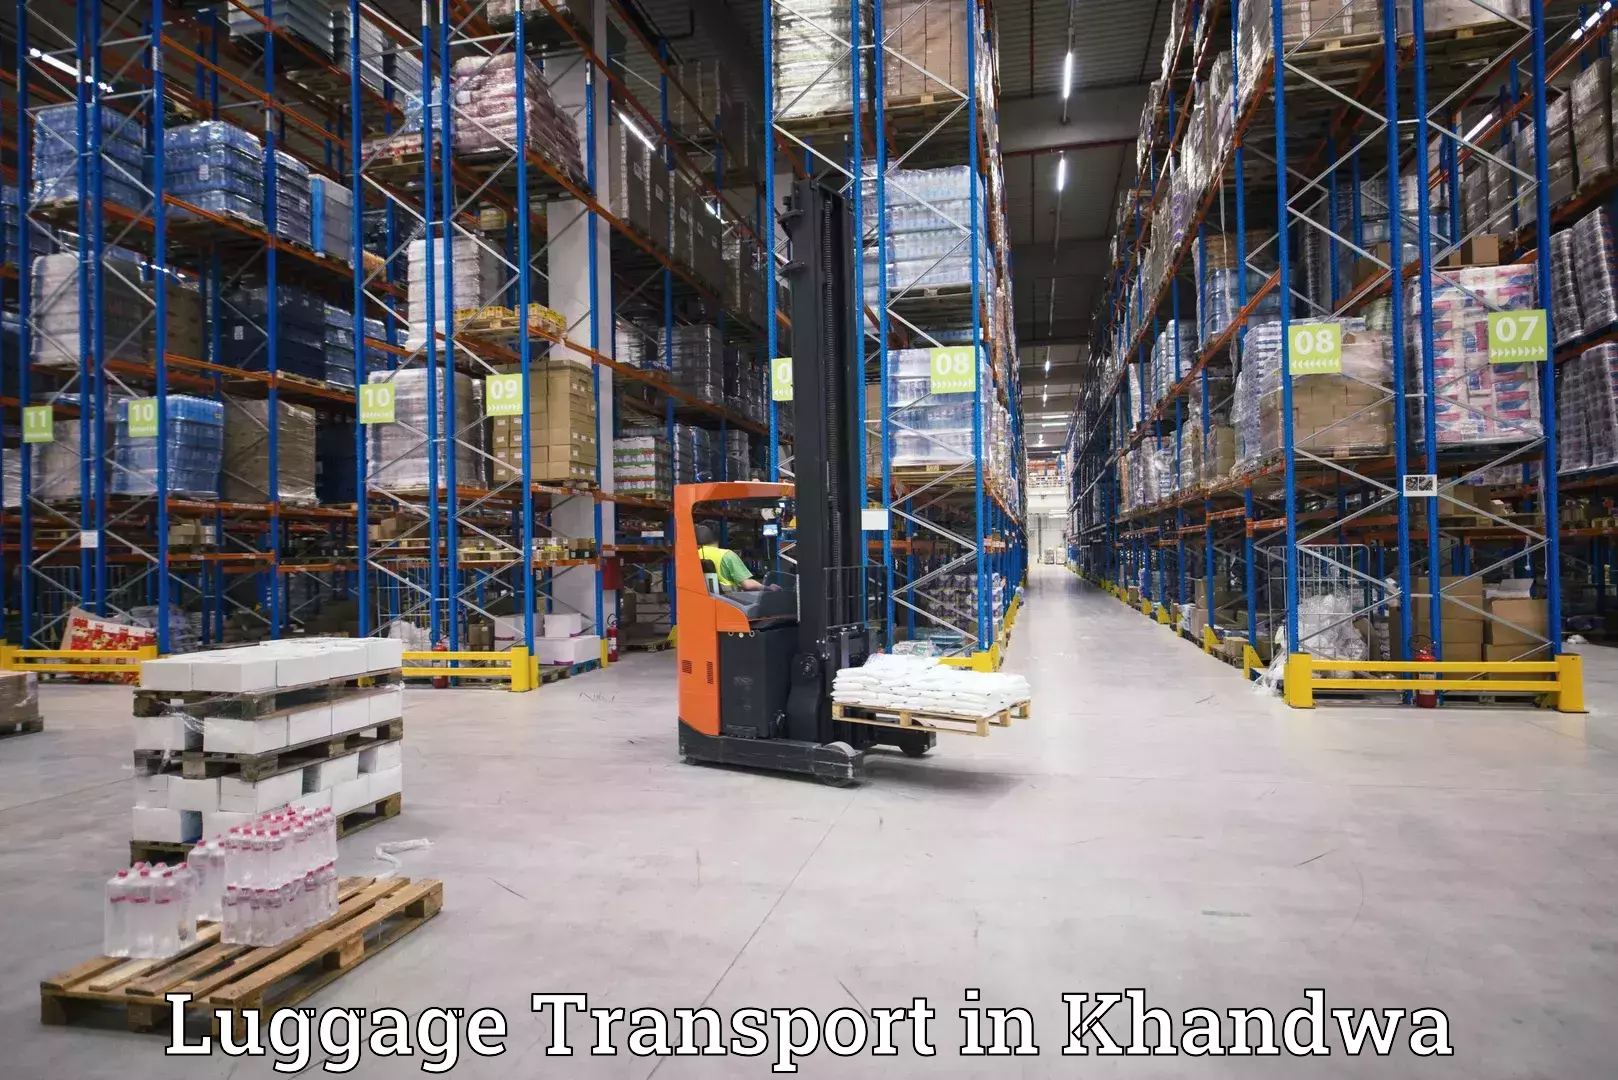 Luggage transport consultancy in Khandwa